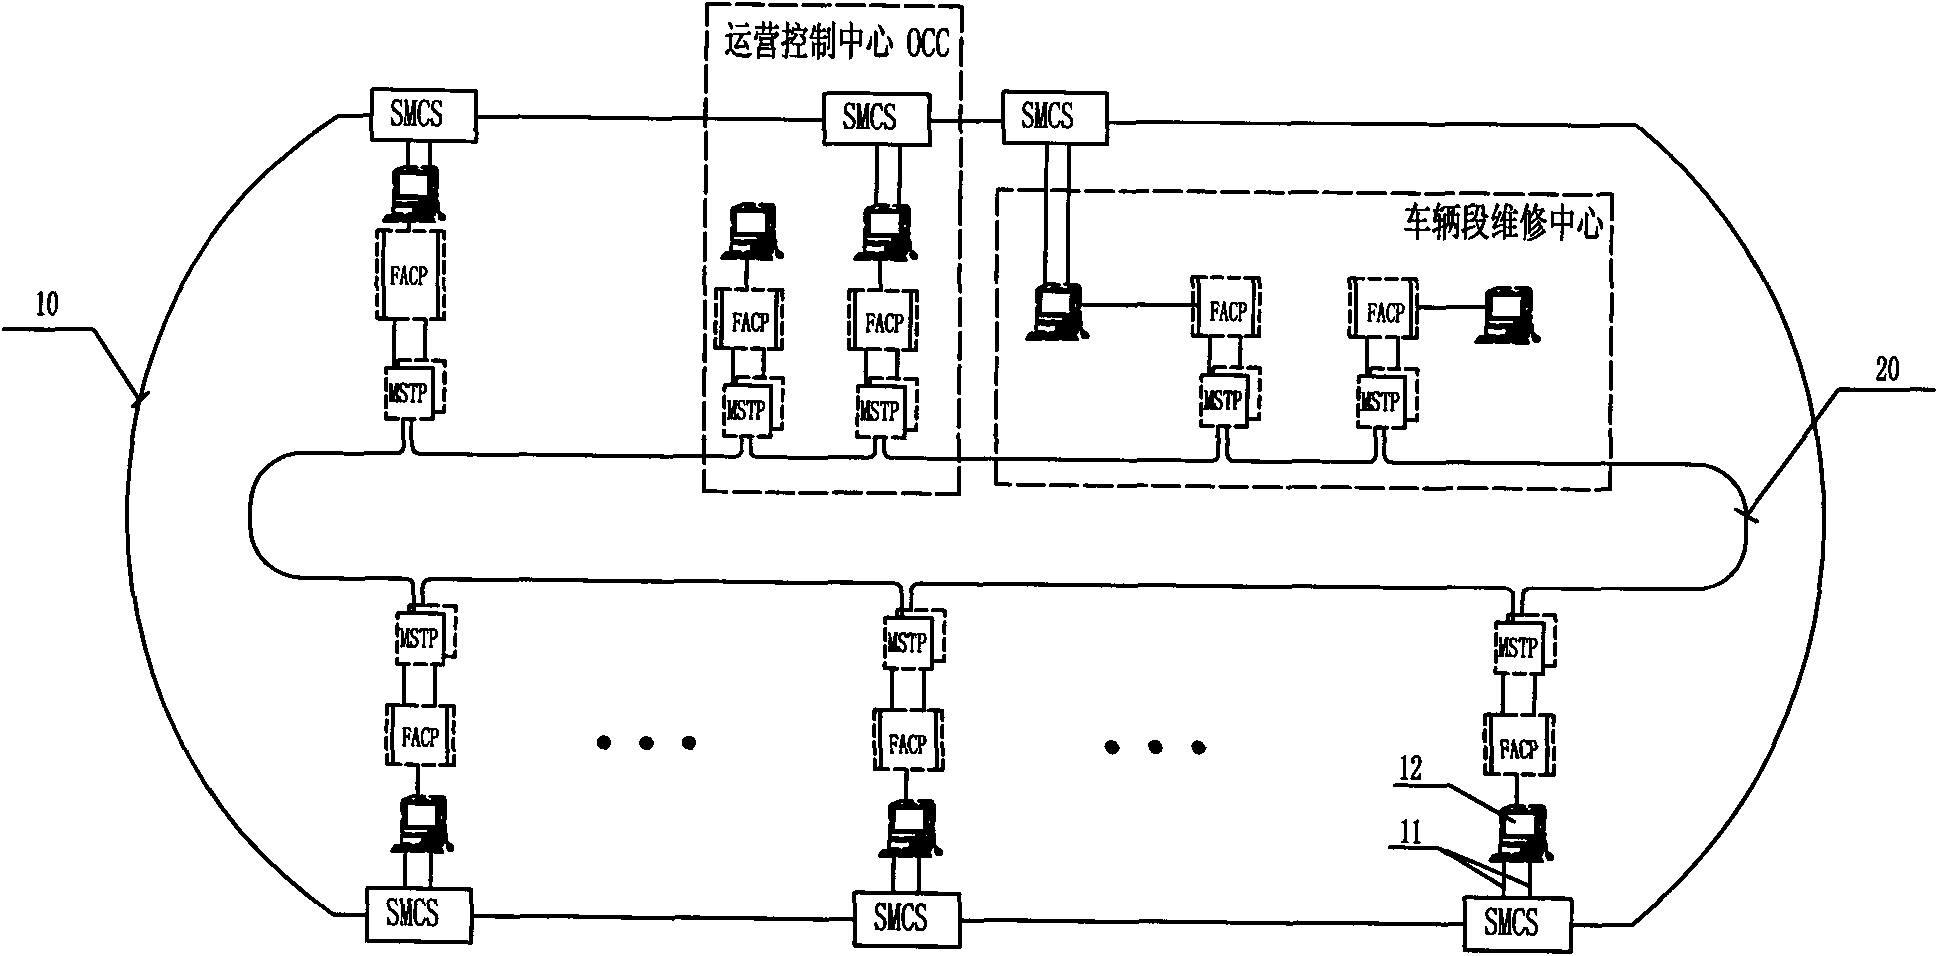 Fire linking control system applied to urban rail transit and method